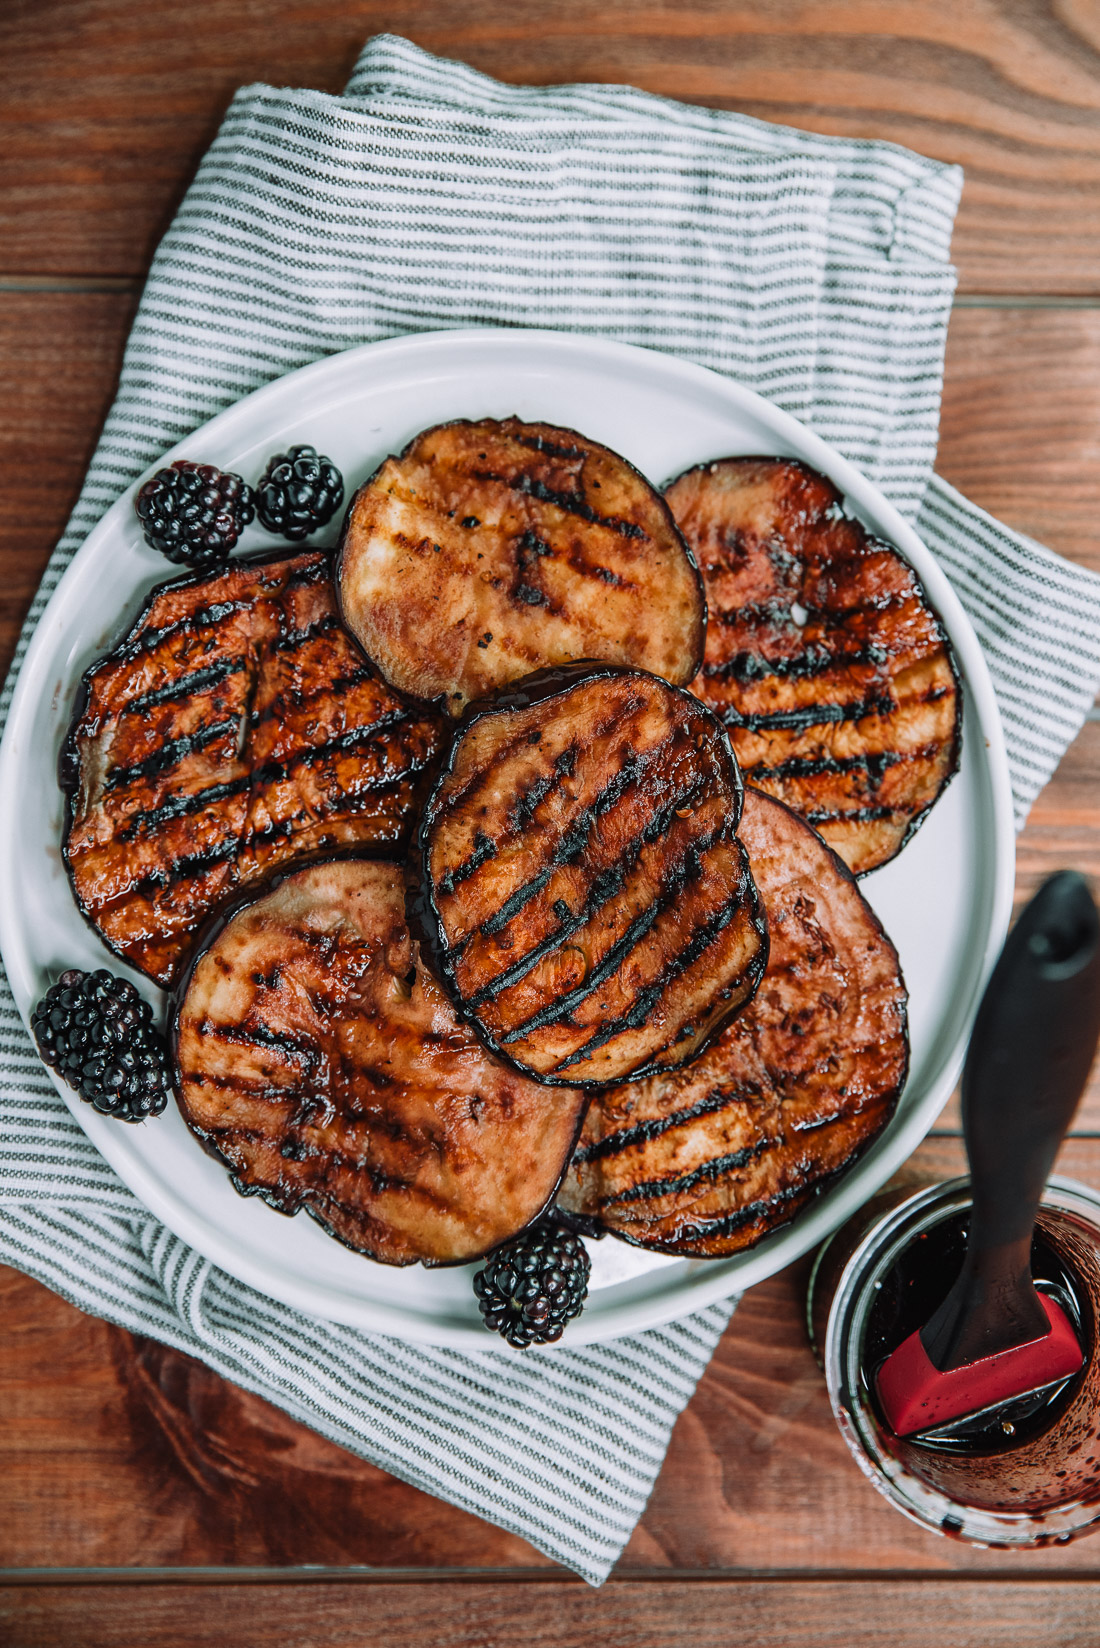 Grilled Eggplant with Blackberry Balsamic Reduction by Farmer's Market Society